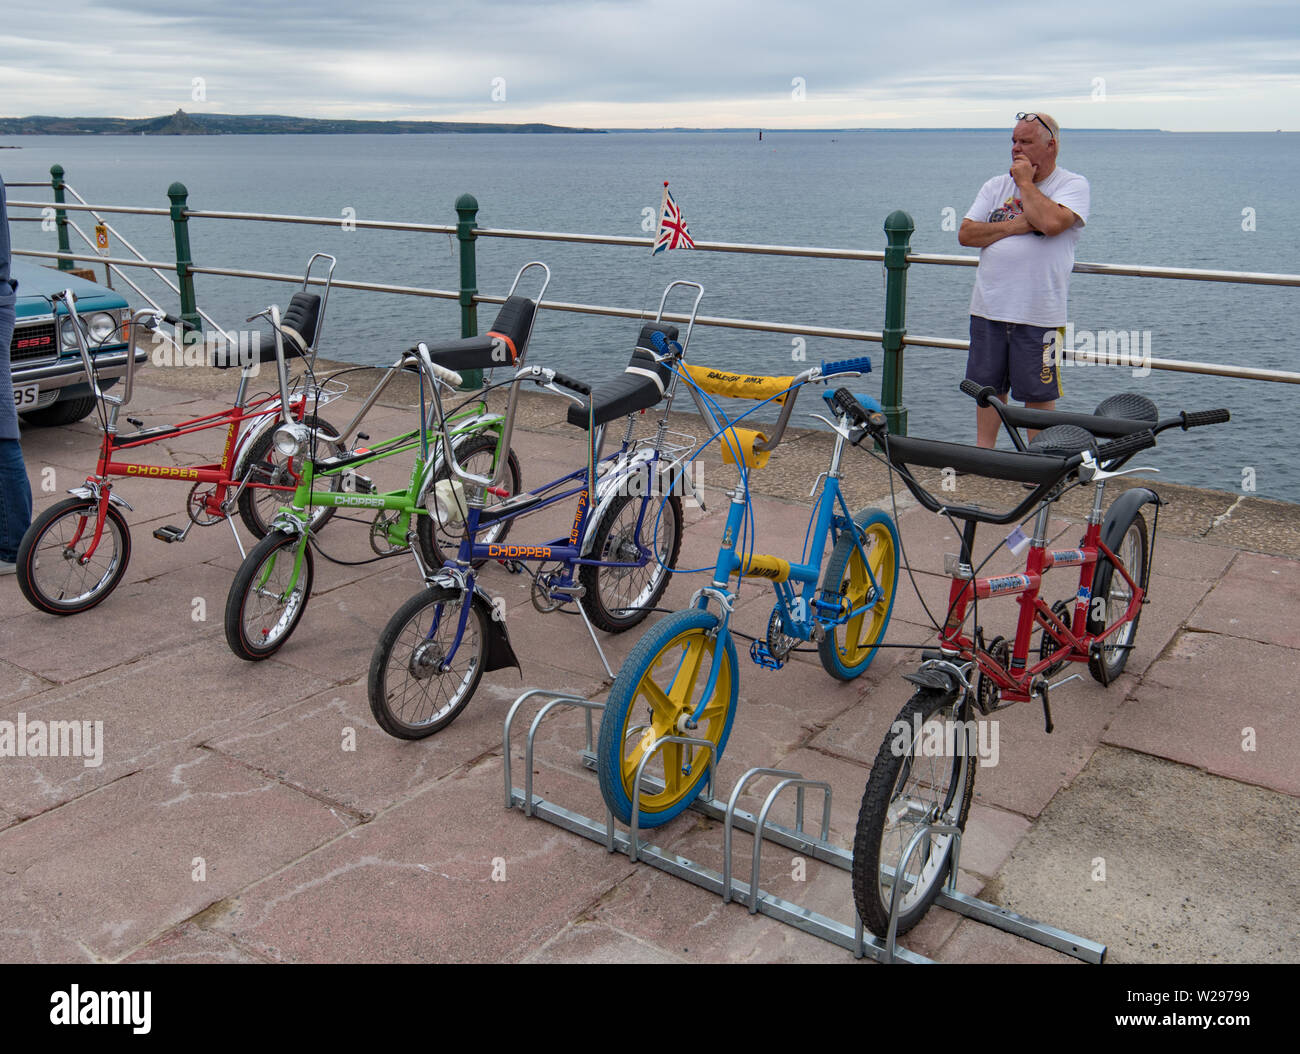 Raleigh Chopper bikes on exhibition outside on seafront at Penzance Stock Photo